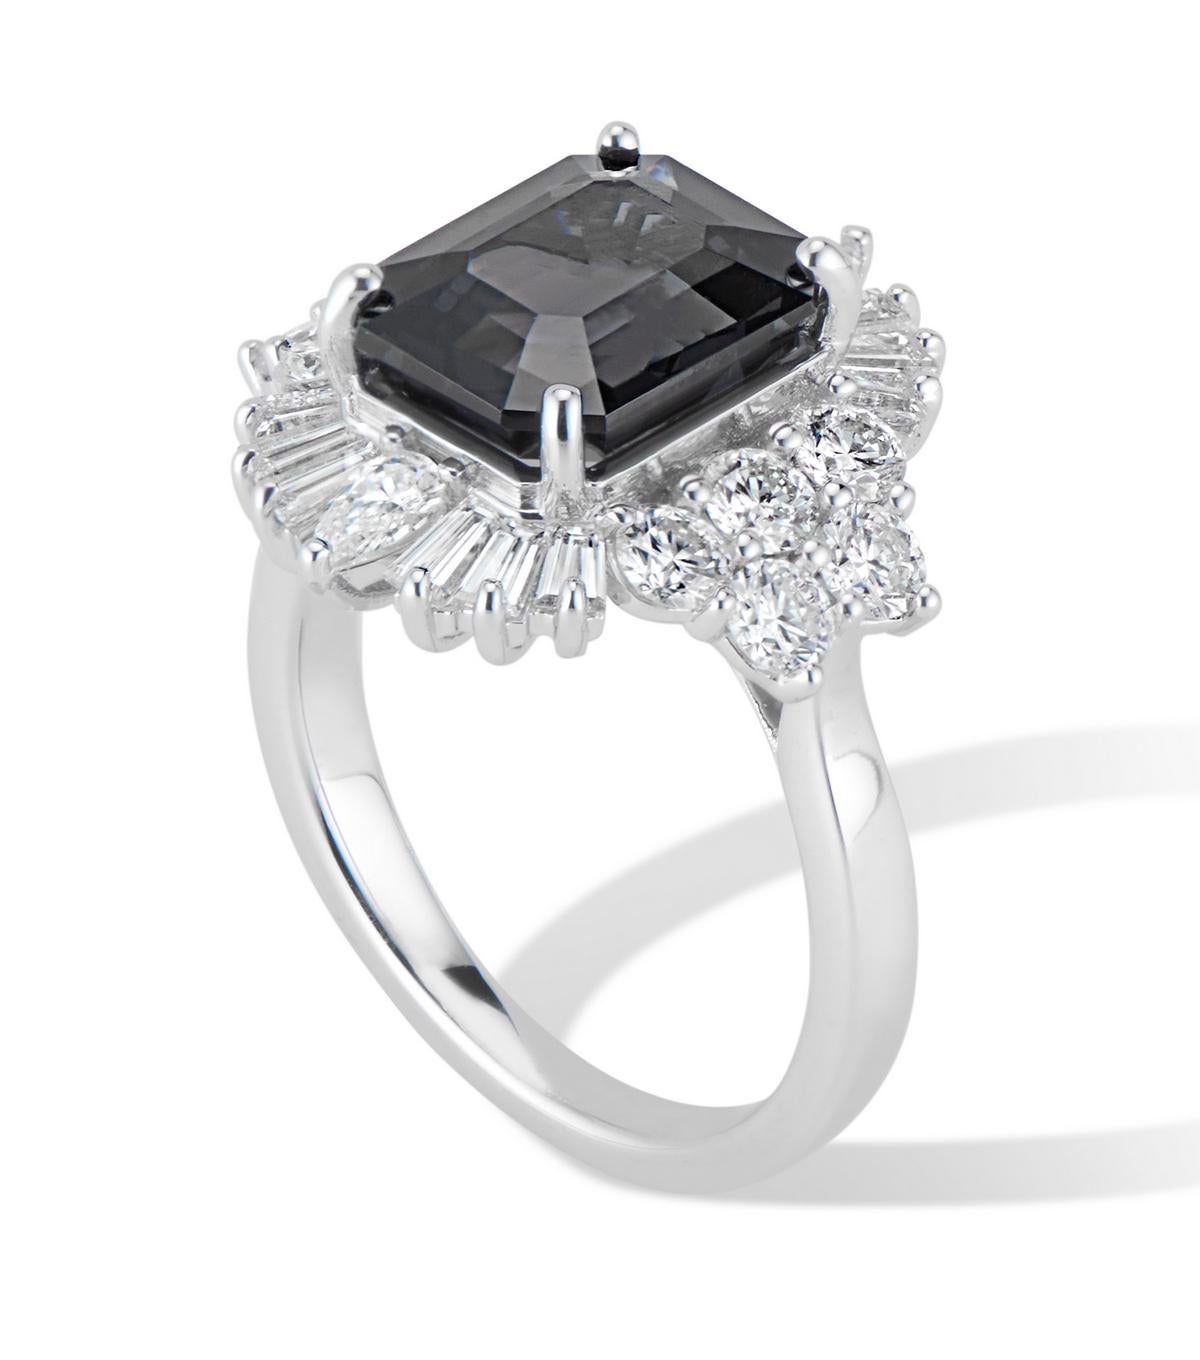 Start a conversation with this show stopping Art Deco inspired ring.  

A show stopping 4.22 ct black Spinel is the centerpiece of this creation, surrounded by a combination of 1.6 ct VS quality round, pear, and tapered baguette shaped diamonds.